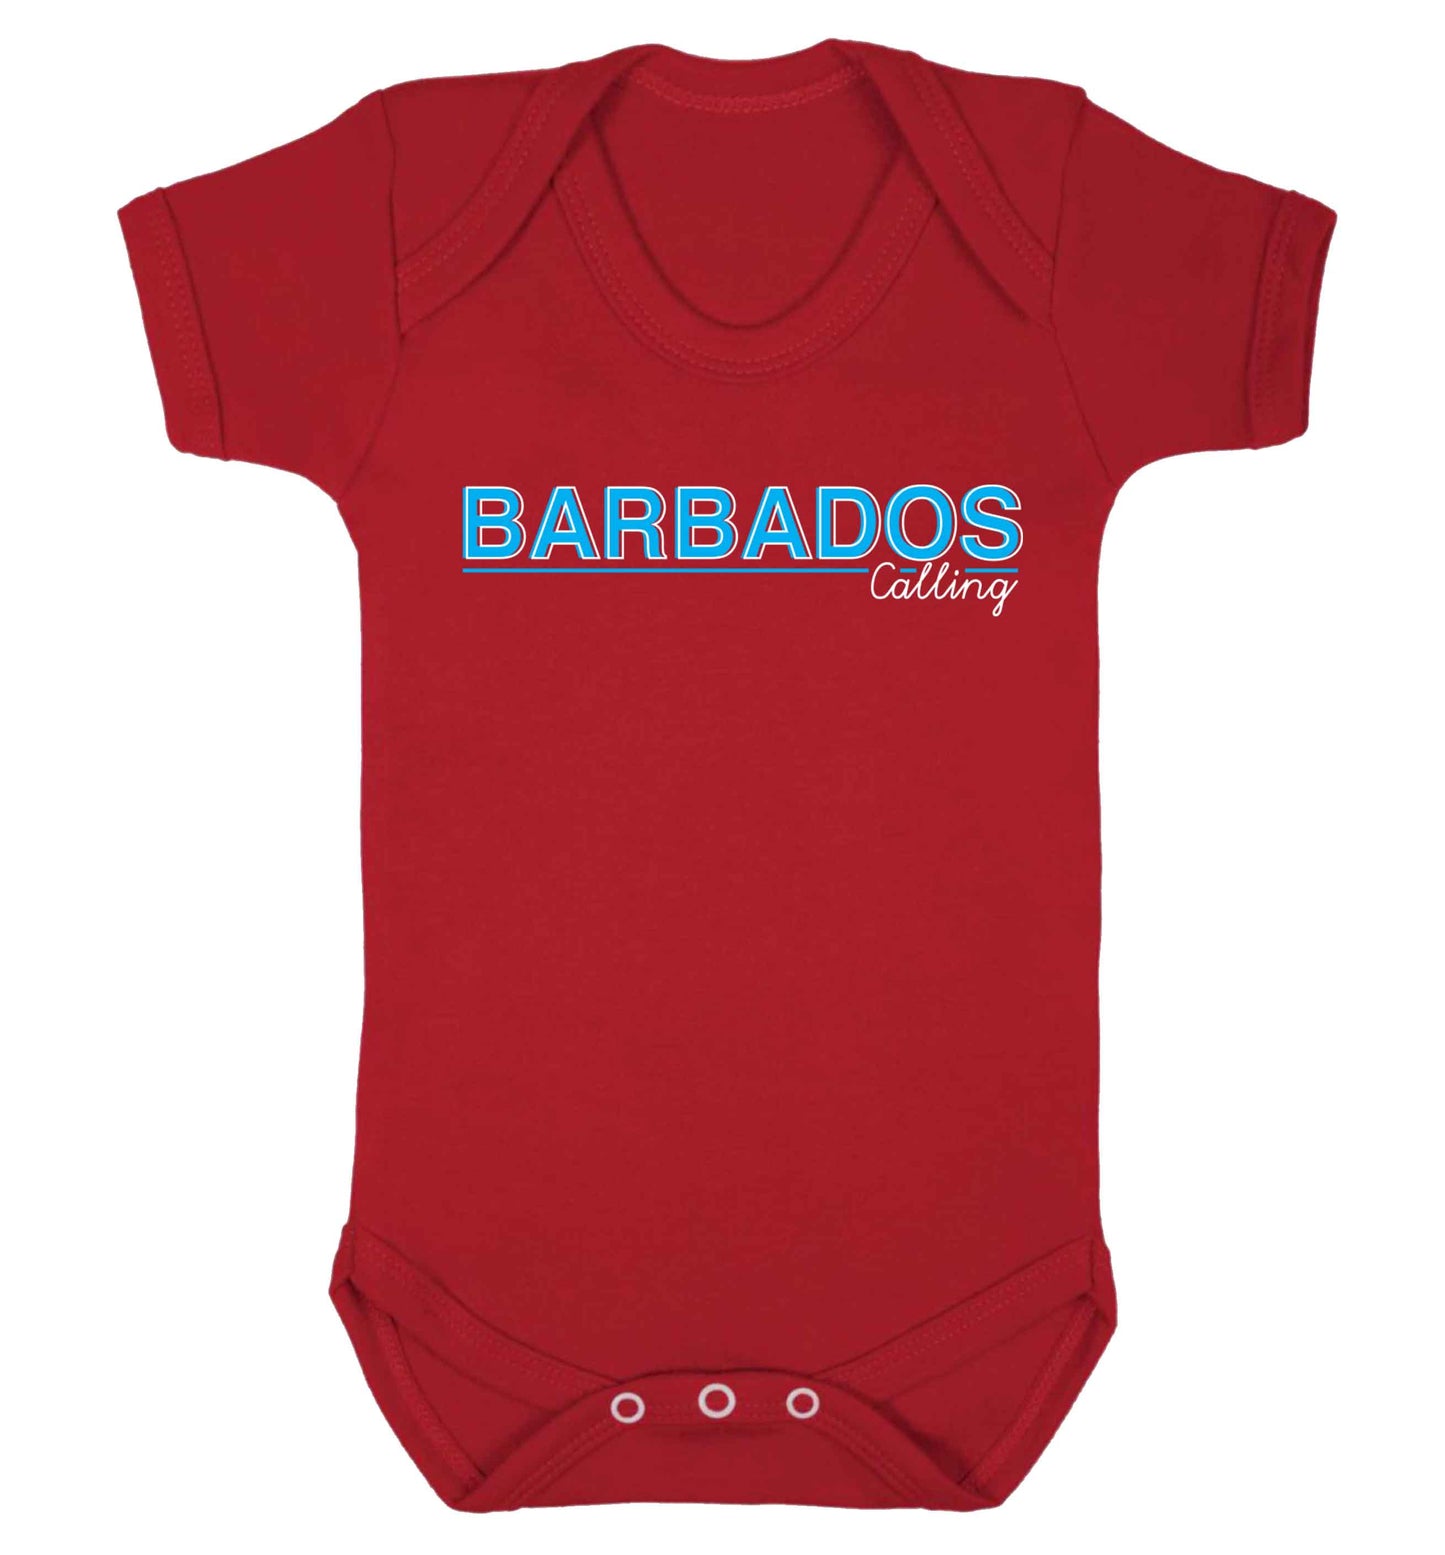 Barbados calling Baby Vest red 18-24 months